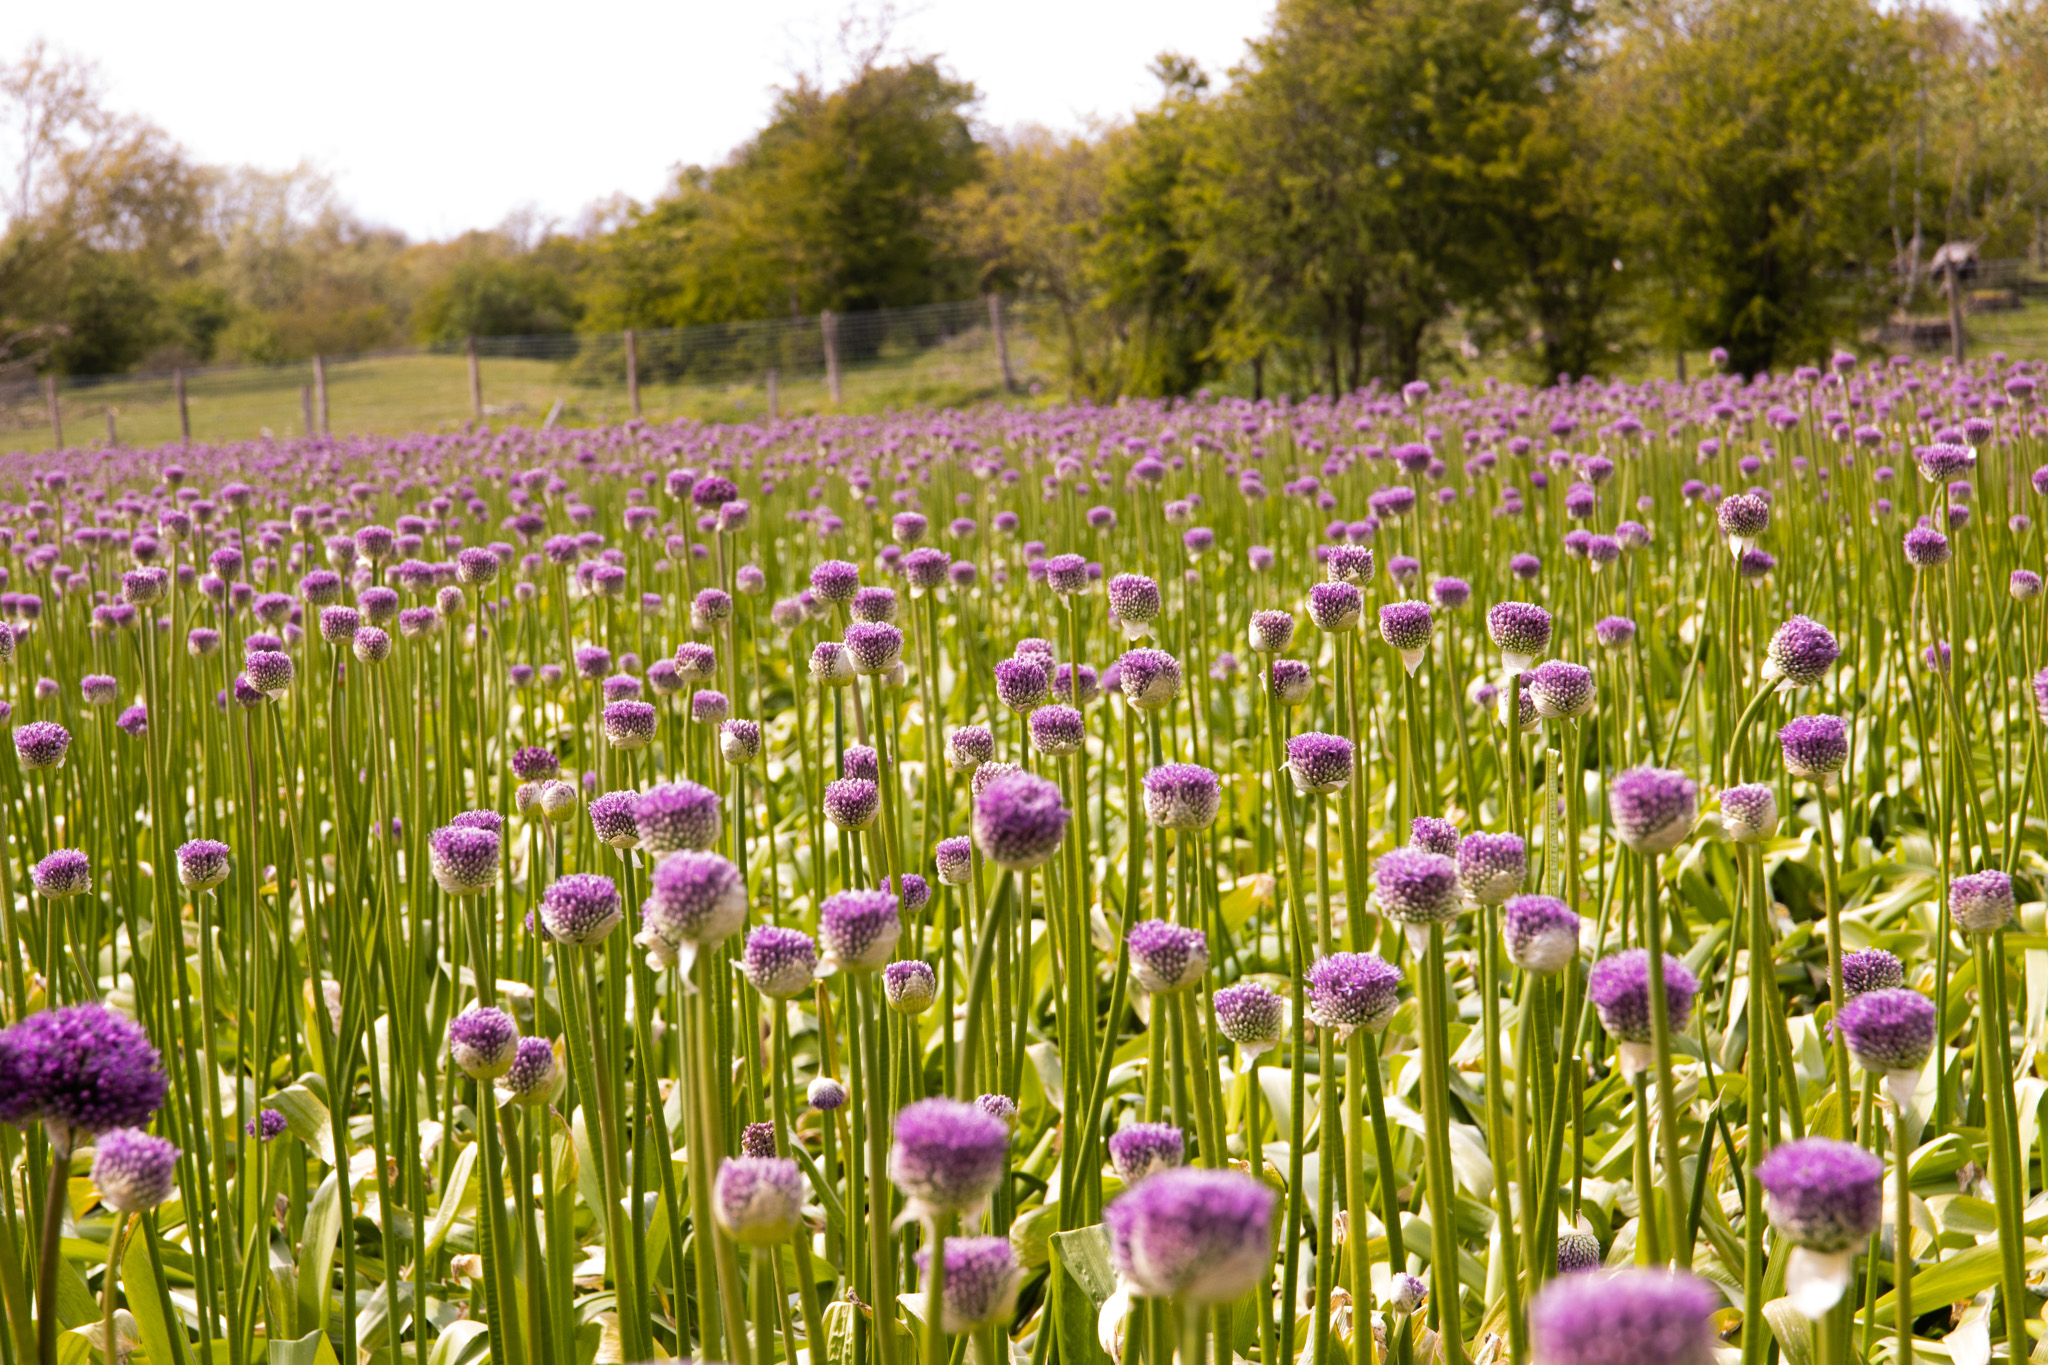 Purple perfection: a day among the Alliums